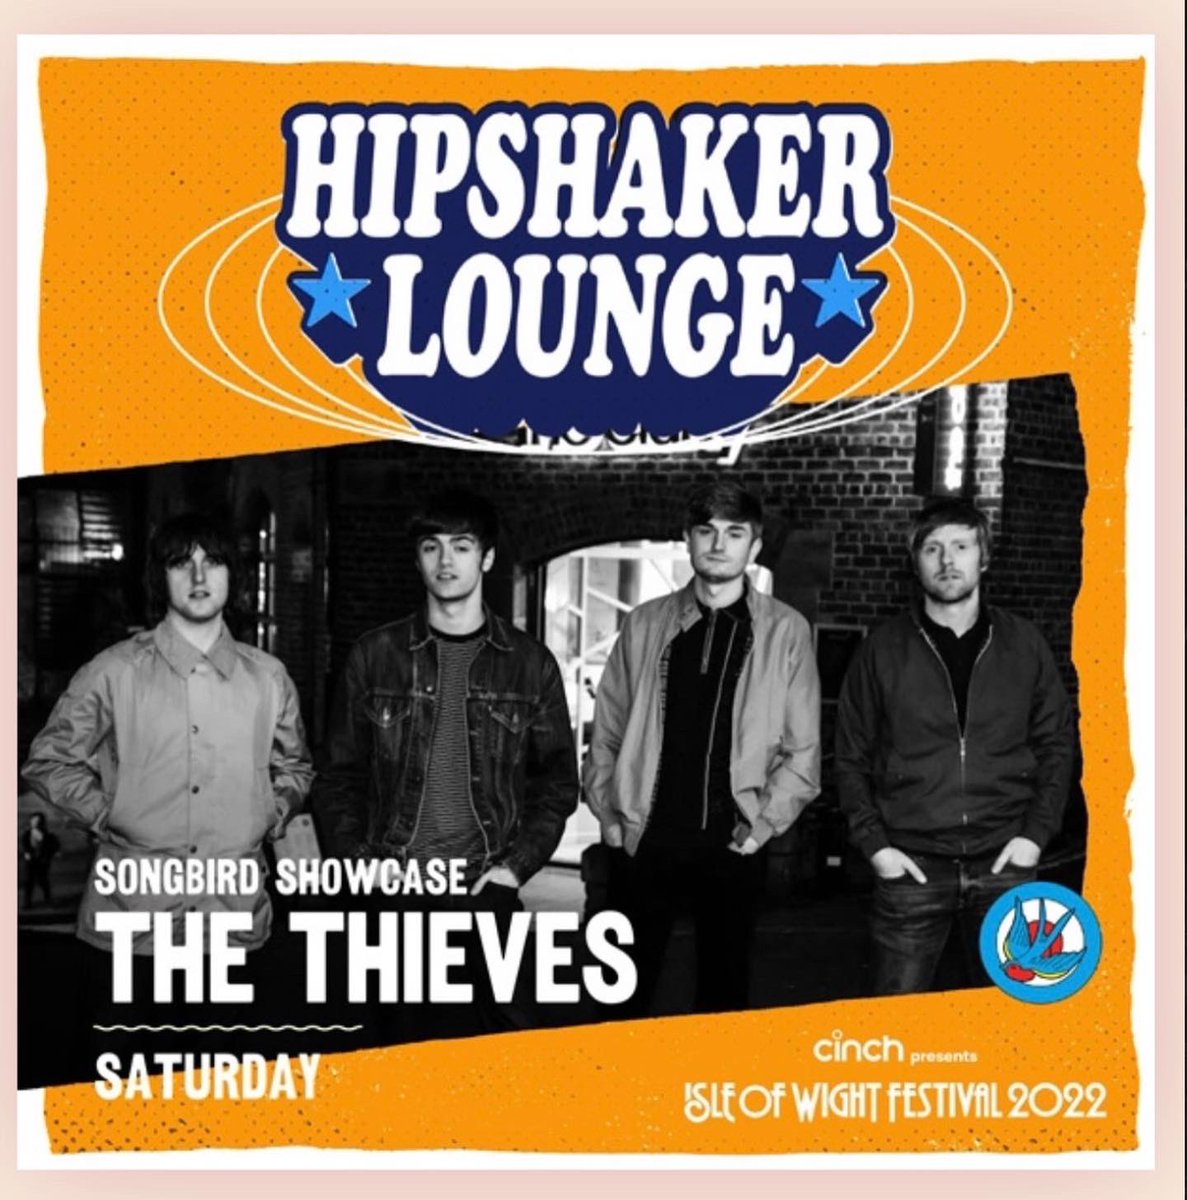 THE SONGBIRD SESSIONS AT THE ISLE OF WIGHT FESTIVAL 

Kicking off the proceedings in style on the Saturday we’ve got @theukthieves 

Stage time 16.00 @HipshakerLounge stage

Remember to share and tag us in all your pics and videos. 
⚡️🧡⚡️

#thethieves #thesongbirdshowcase #IOW22